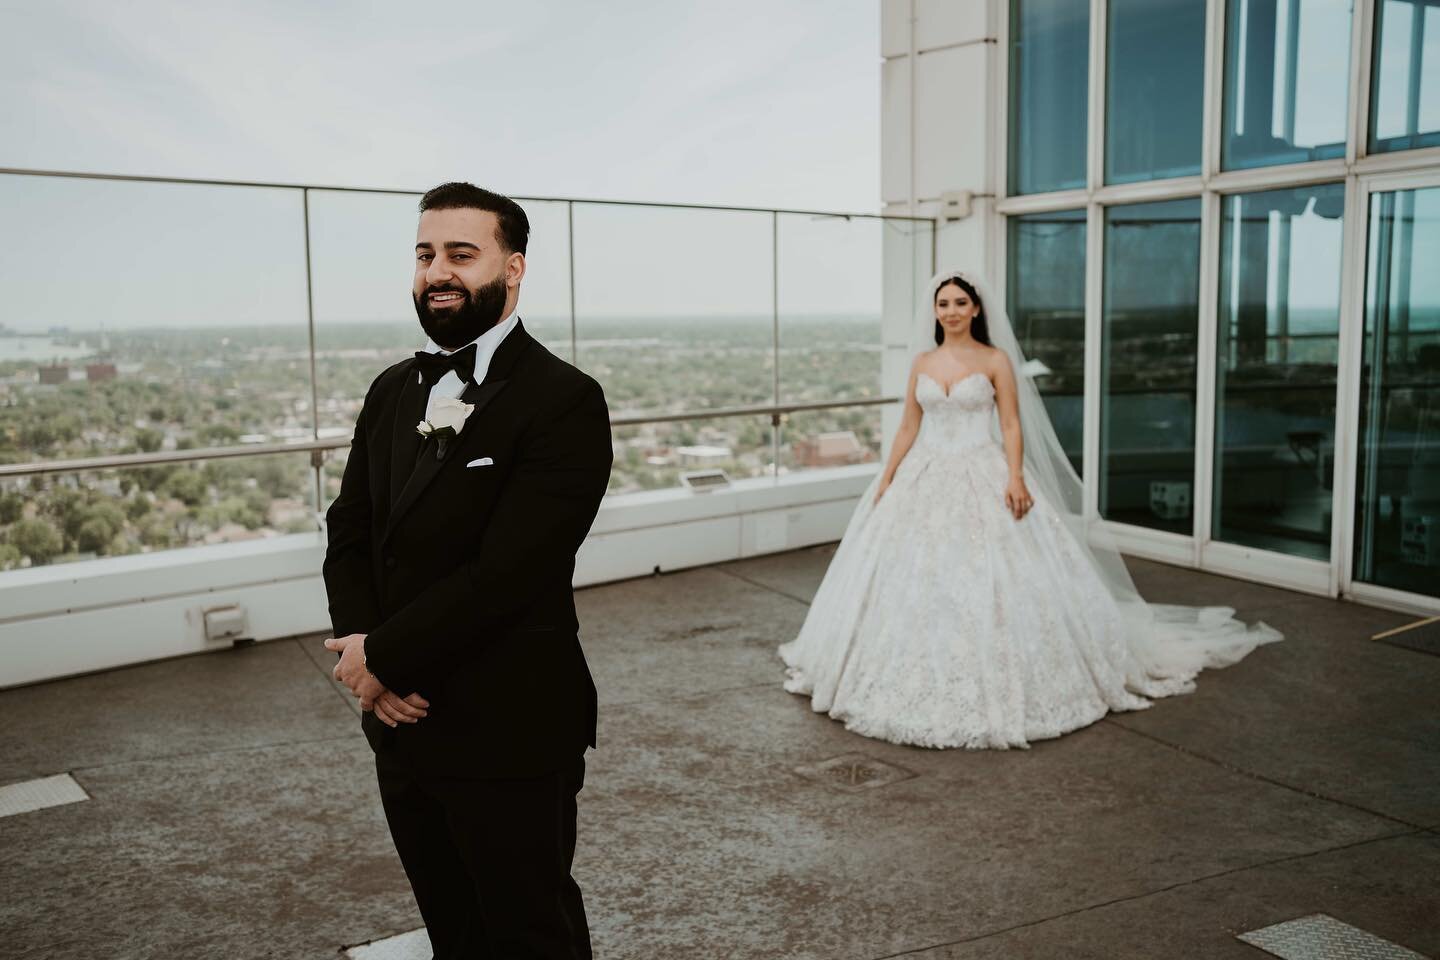 Capturing Pure Emotion: Witnessing the groom's awe-struck expression as he laid eyes on his beautiful bride for the very first time. Such a precious moment filled with love and anticipation. Honored to freeze this extraordinary moment in time. 📸💍 #